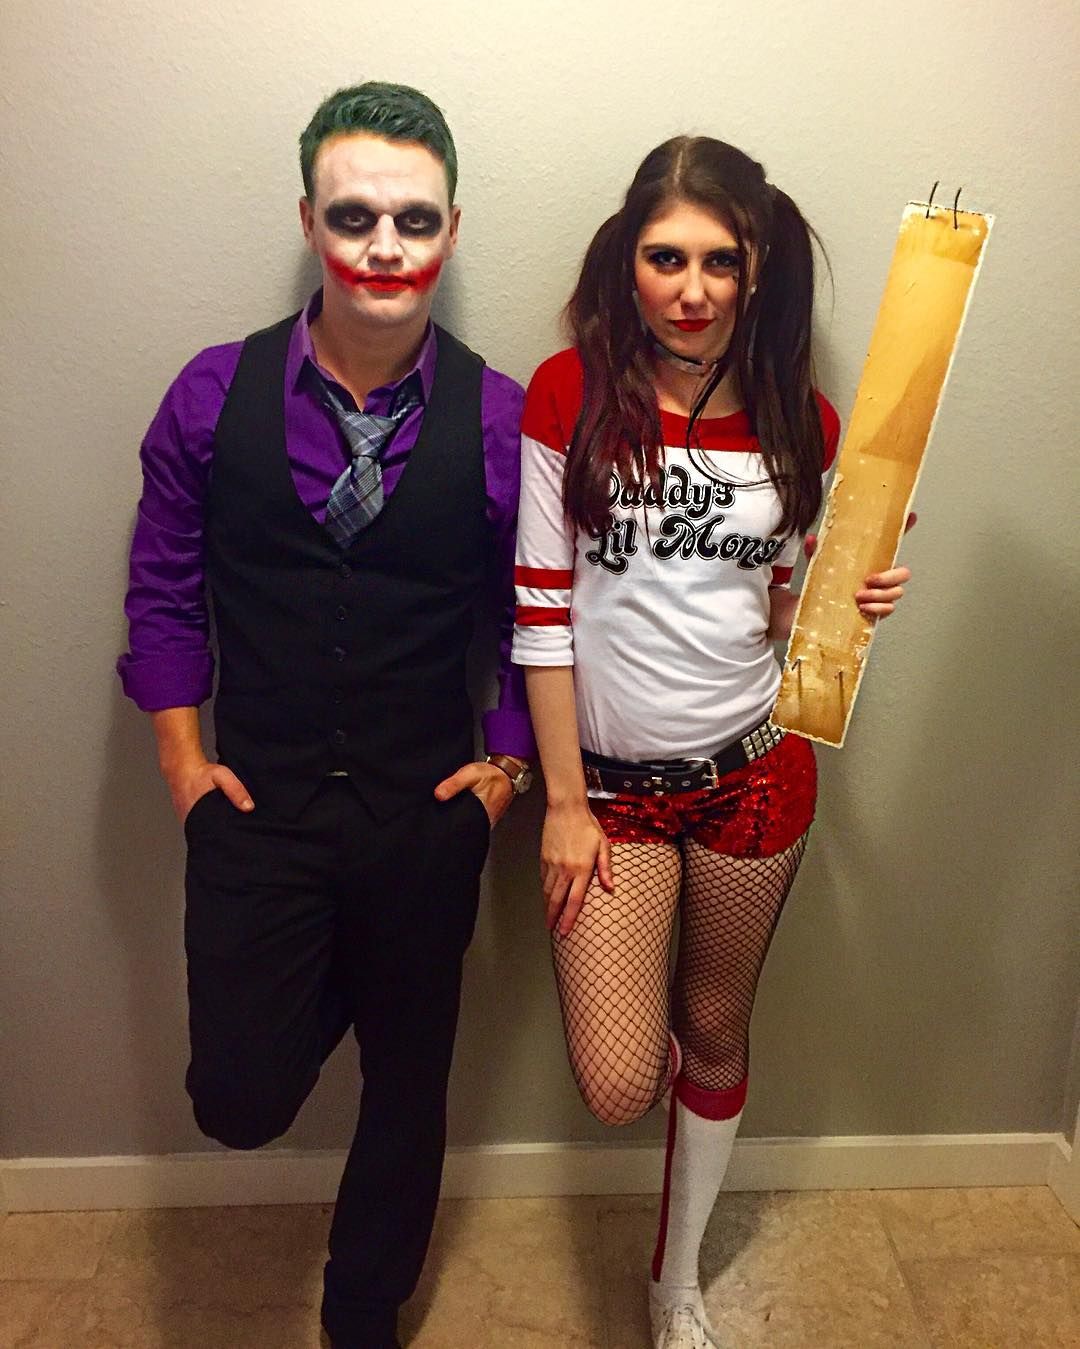 Family Halloween Costumes Based On Movies